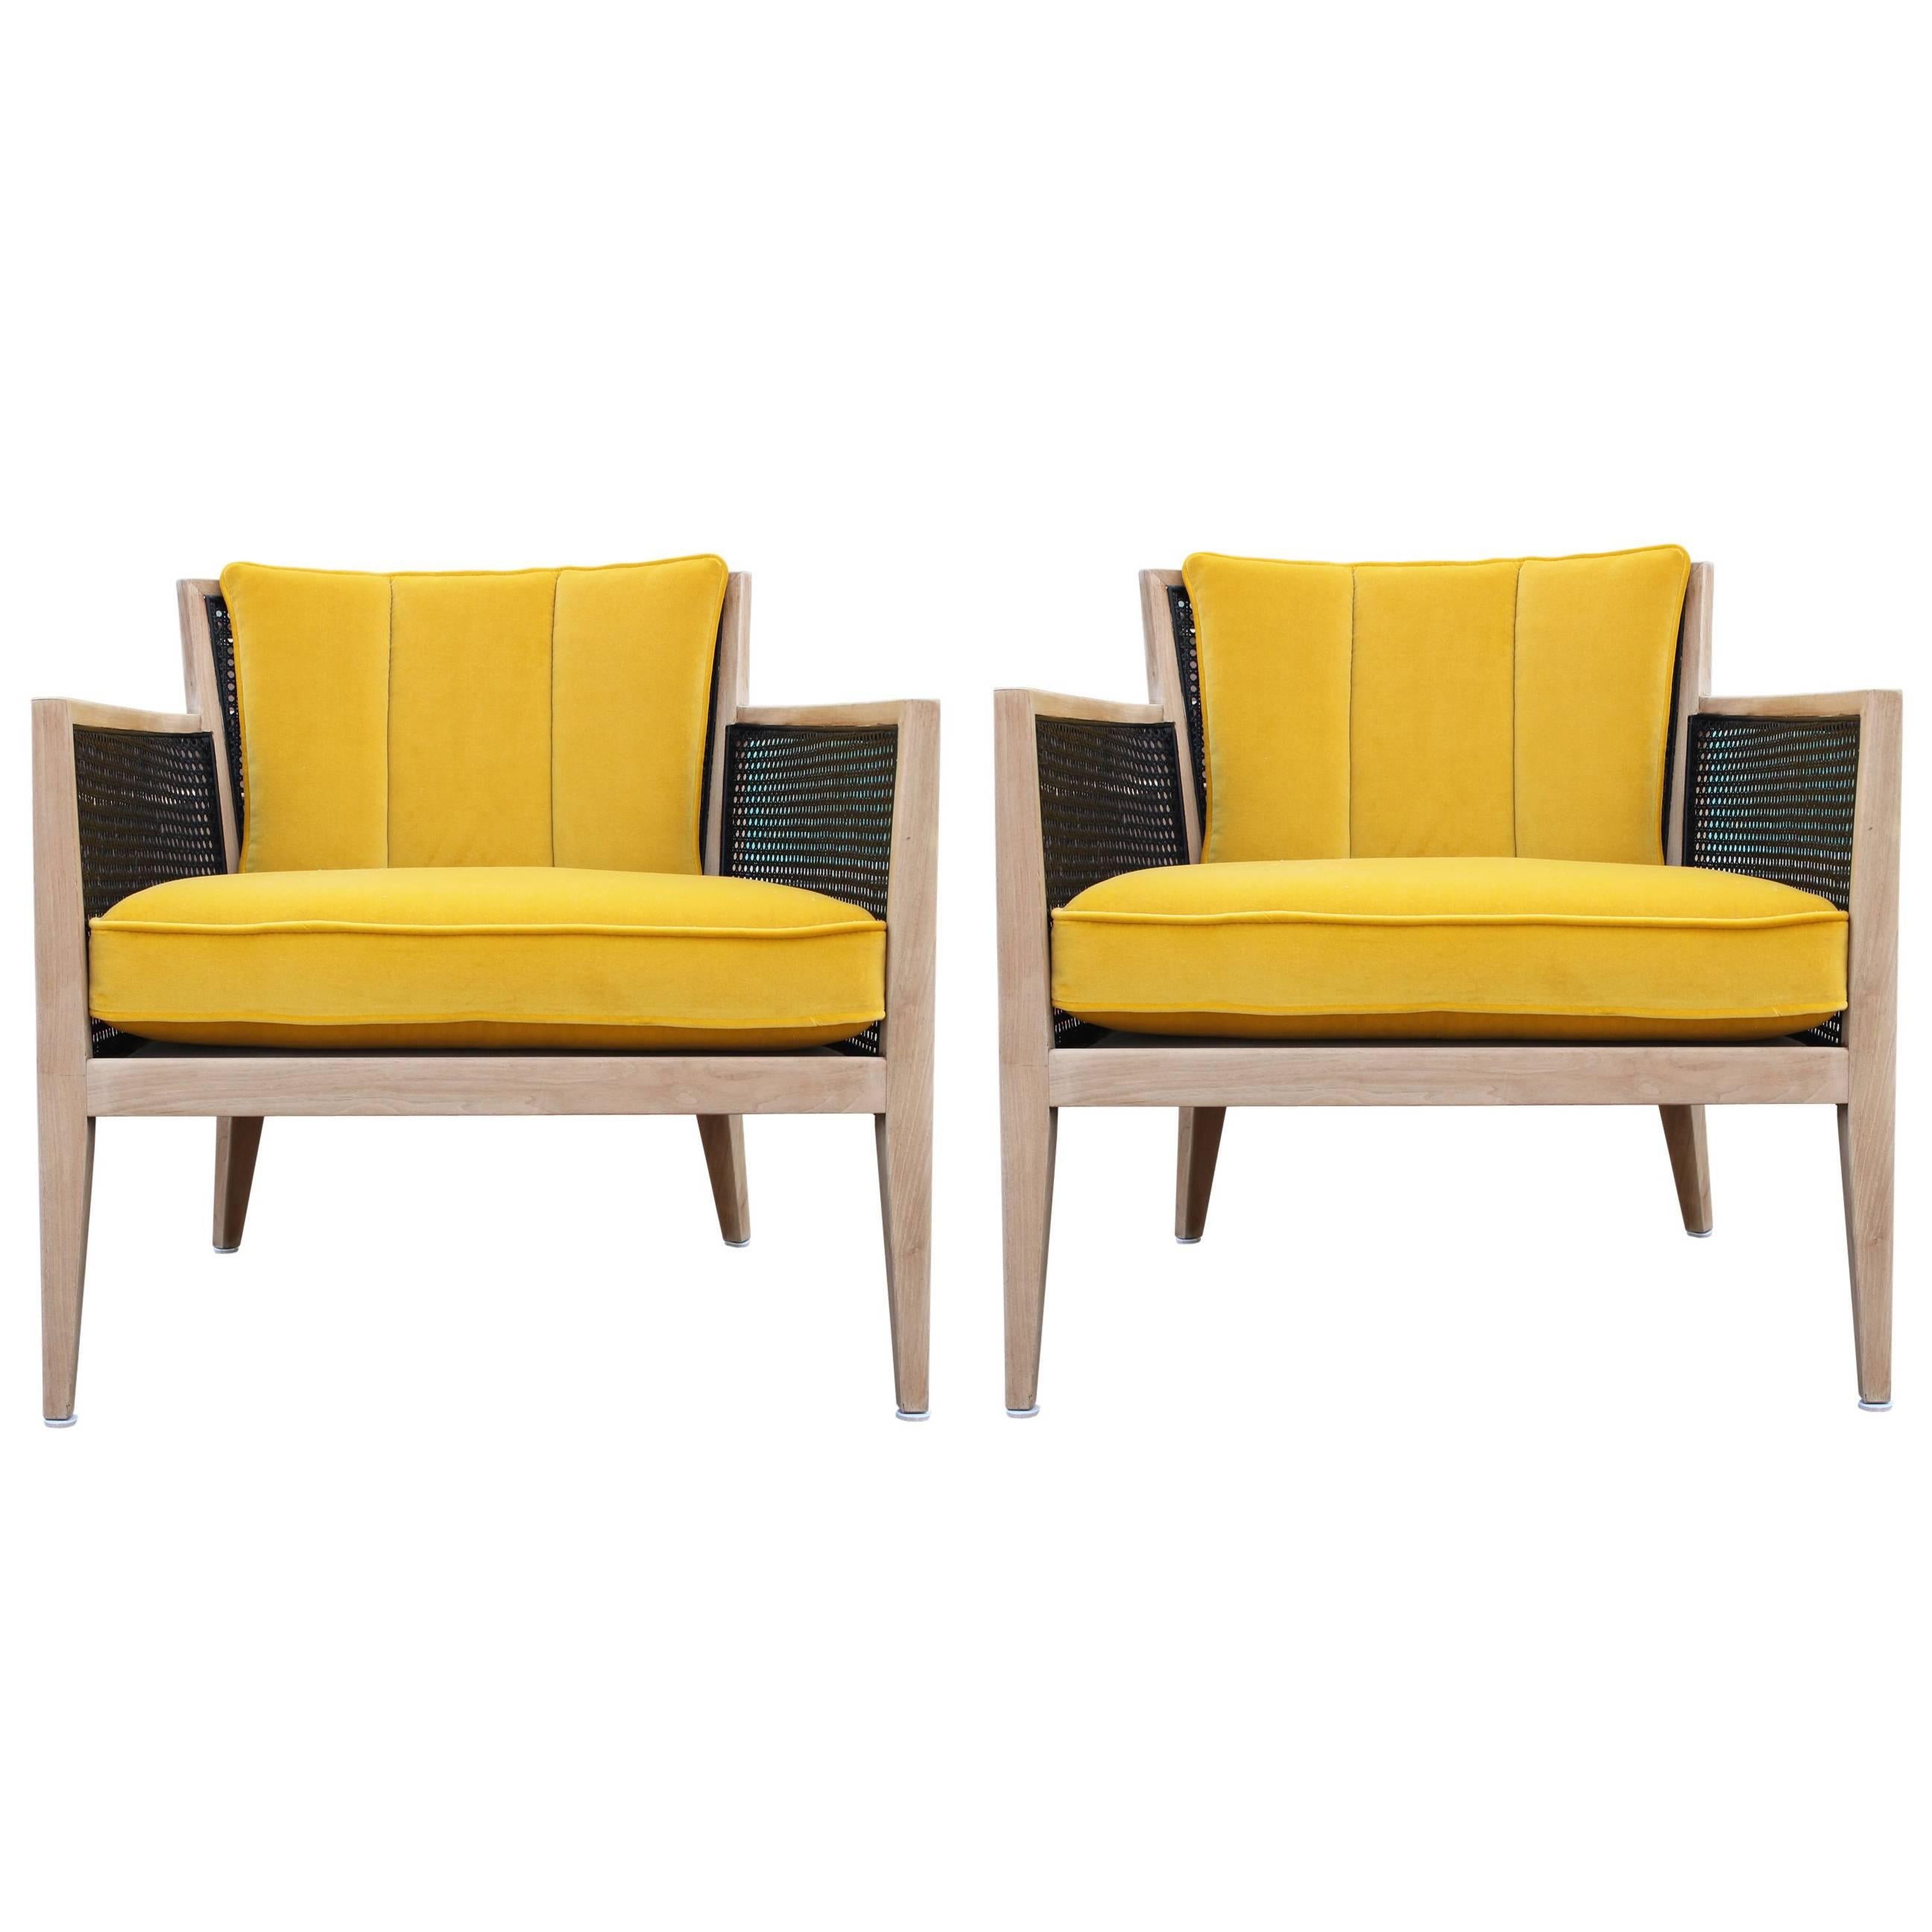 Pair of Modern Harvey Probber Bleached Wood Cane Lounge Chairs in Yellow Velvet